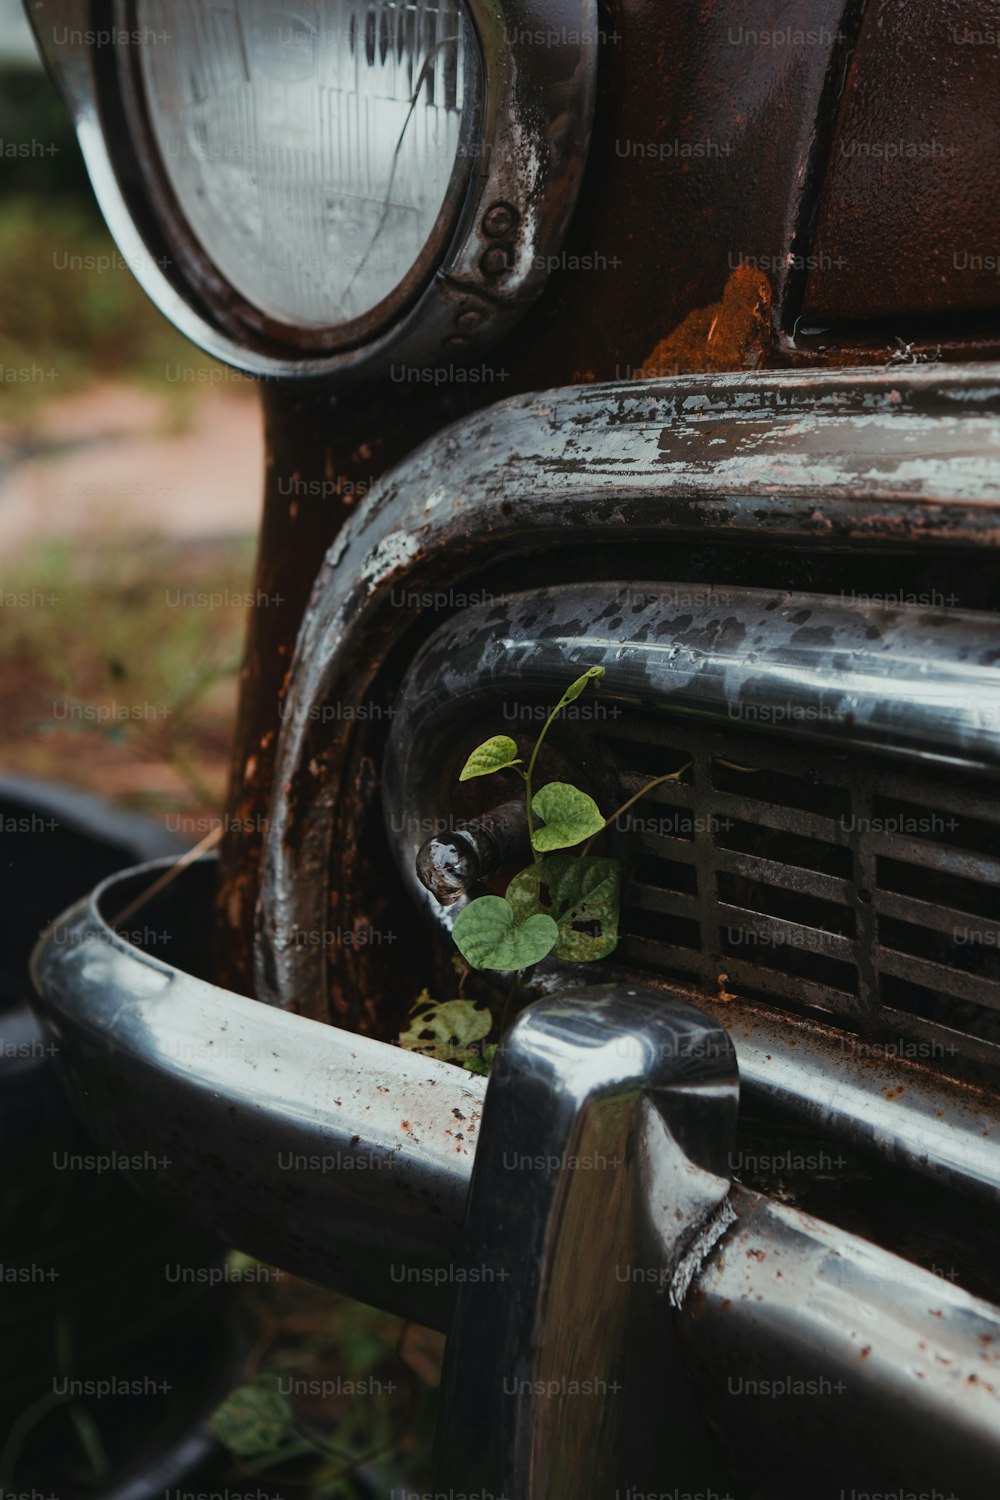 a plant growing out of the grill of an old car